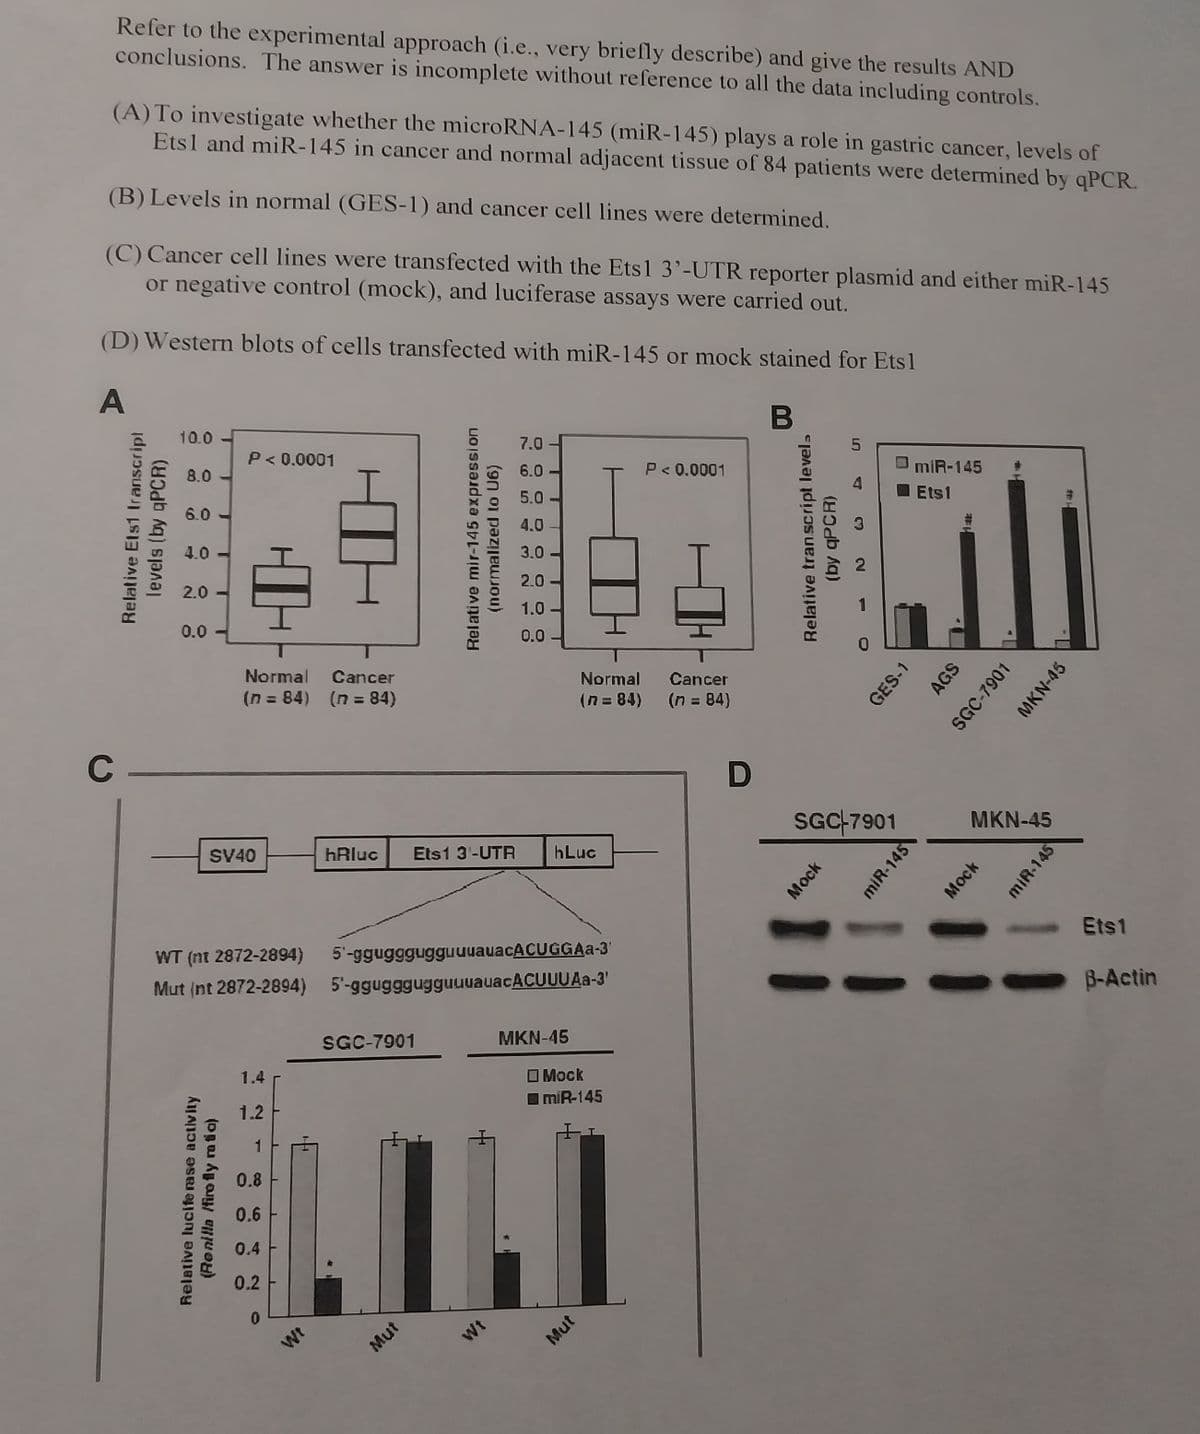 Refer to the experimental approach (i.e., very briefly describe) and give the results AND
conclusions. The answer is incomplete without reference to all the data including controls.
(A) To investigate whether the microRNA-145 (miR-145) plays a role in gastric cancer, levels of
Ets1 and miR-145 in cancer and normal adjacent tissue of 84 patients were determined by qPCR.
(B) Levels in normal (GES-1) and cancer cell lines were determined.
(C) Cancer cell lines were transfected with the Ets1 3'-UTR reporter plasmid and either miR-145
or negative control (mock), and luciferase assays were carried out.
(D) Western blots of cells transfected with miR-145 or mock stained for Ets1
A
B
Relative Ets1 Iranscript
levels (by qPCR)
C-
10.0
8.0
6.0
4.0 -
2.0
0.0
P<0.0001
Normal Cancer
(n = 84) (n = 84)
SV40
Relative luciferase activity
(Renilla /firefly ratio)
1.4
1.2
1
0.8
0.6
0.4
0.2
0
Wt
hRluc Ets1 3¹-UTR
Relative mir-145 expression
(normalized to U6)
WT (nt 2872-2894) 5'-ggugggugguuuauacACUGGAa-3'
Mut (nt 2872-2894) 5'-ggugggugguuuauacACUUU Aa-3'
SGC-7901
Mut
7.0
6.0
5.0
4.0
3.0
Wt
2.0
1.0
0.0
hLuc
Normal Cancer
(n=84) (n = 84)
MKN-45
Mock
miR-145
P<0.0001
Mut
D
Relative transcript levels
(by qPCR)
51
Mock
3
SGC-7901
GES-1
miR-145
miR-145
Ets1
AGS
SGC-7901
MKN-45
Mock
MKN-45
miR-145
Ets1
B-Actin